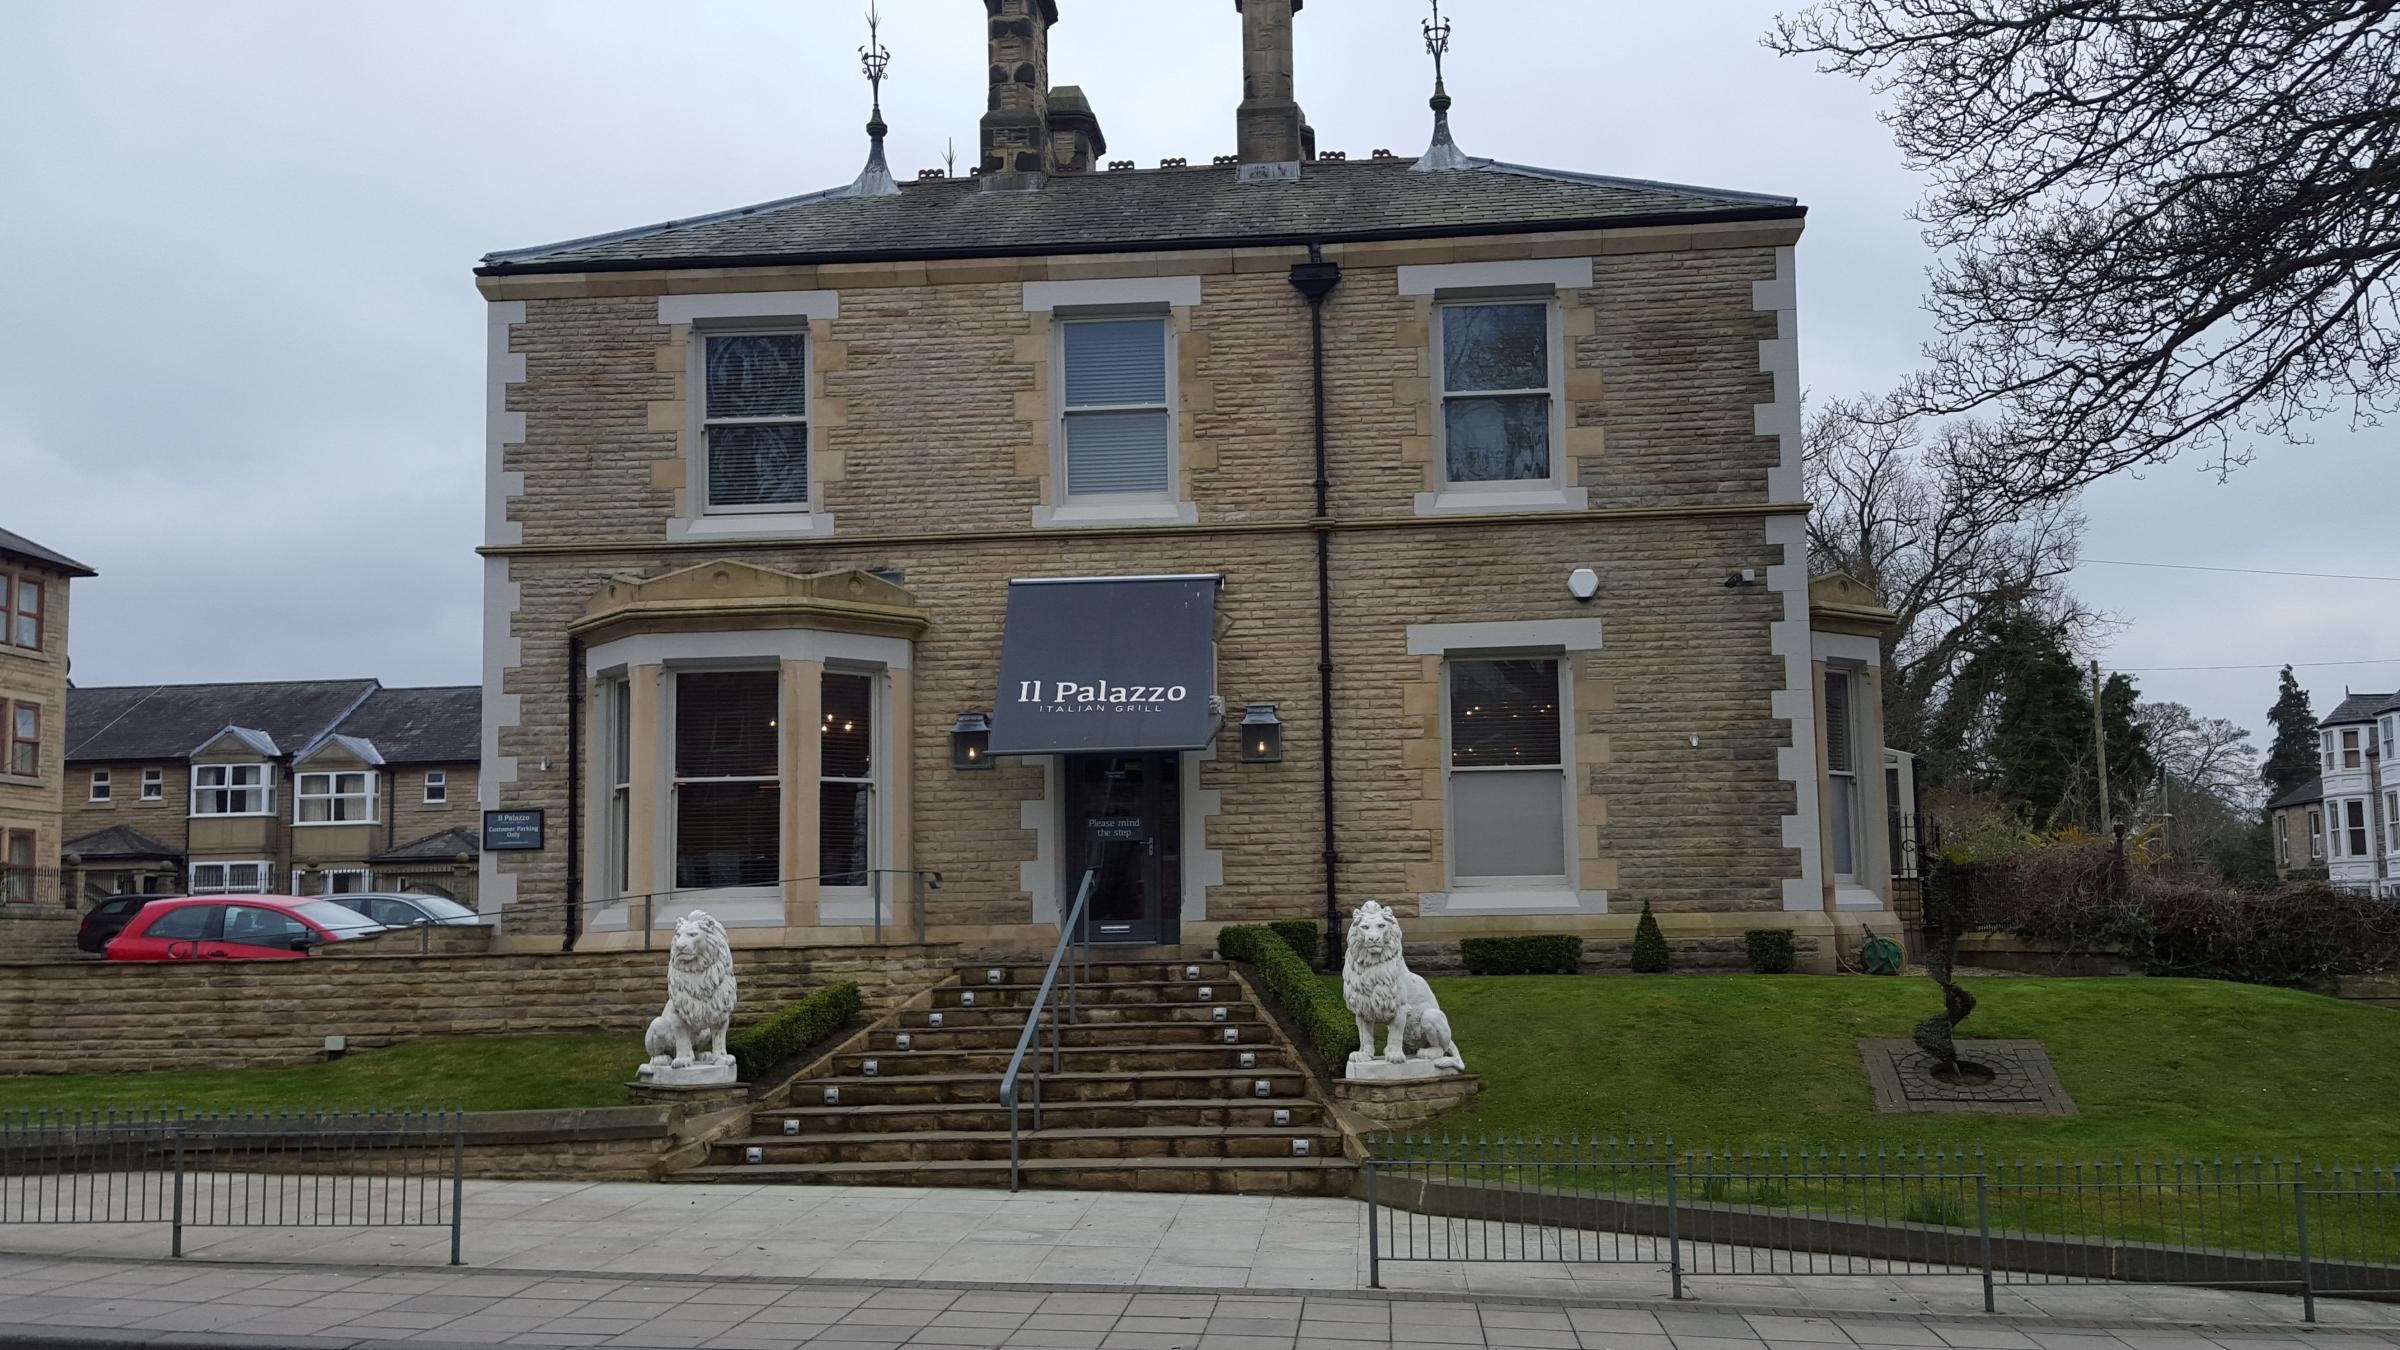 The Beaconsfield Hotel in Galgate, Barnard Castle, was built in 1878 as the home of successful bookmaker Joseph Errington